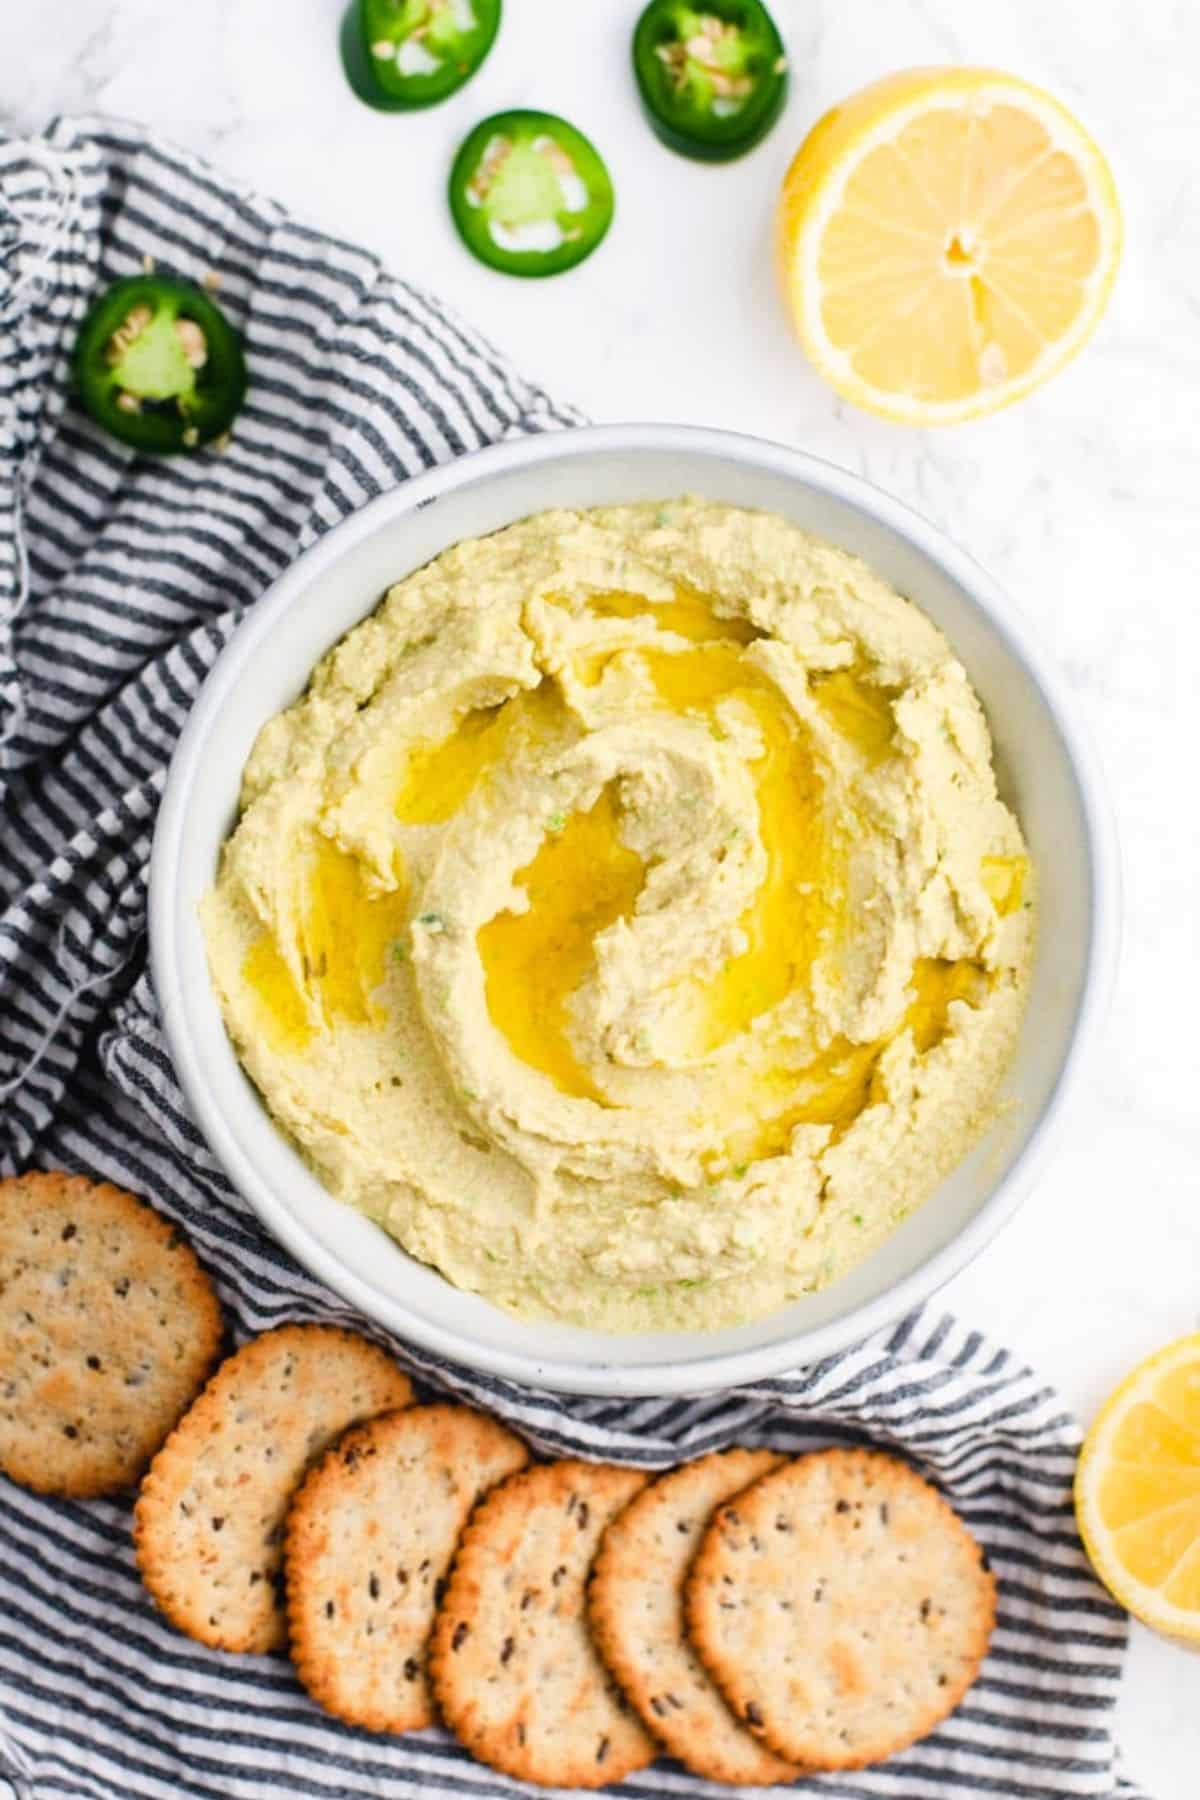 Bowl filled with creamy appearing hummus next to crackers and sliced jalapenos.